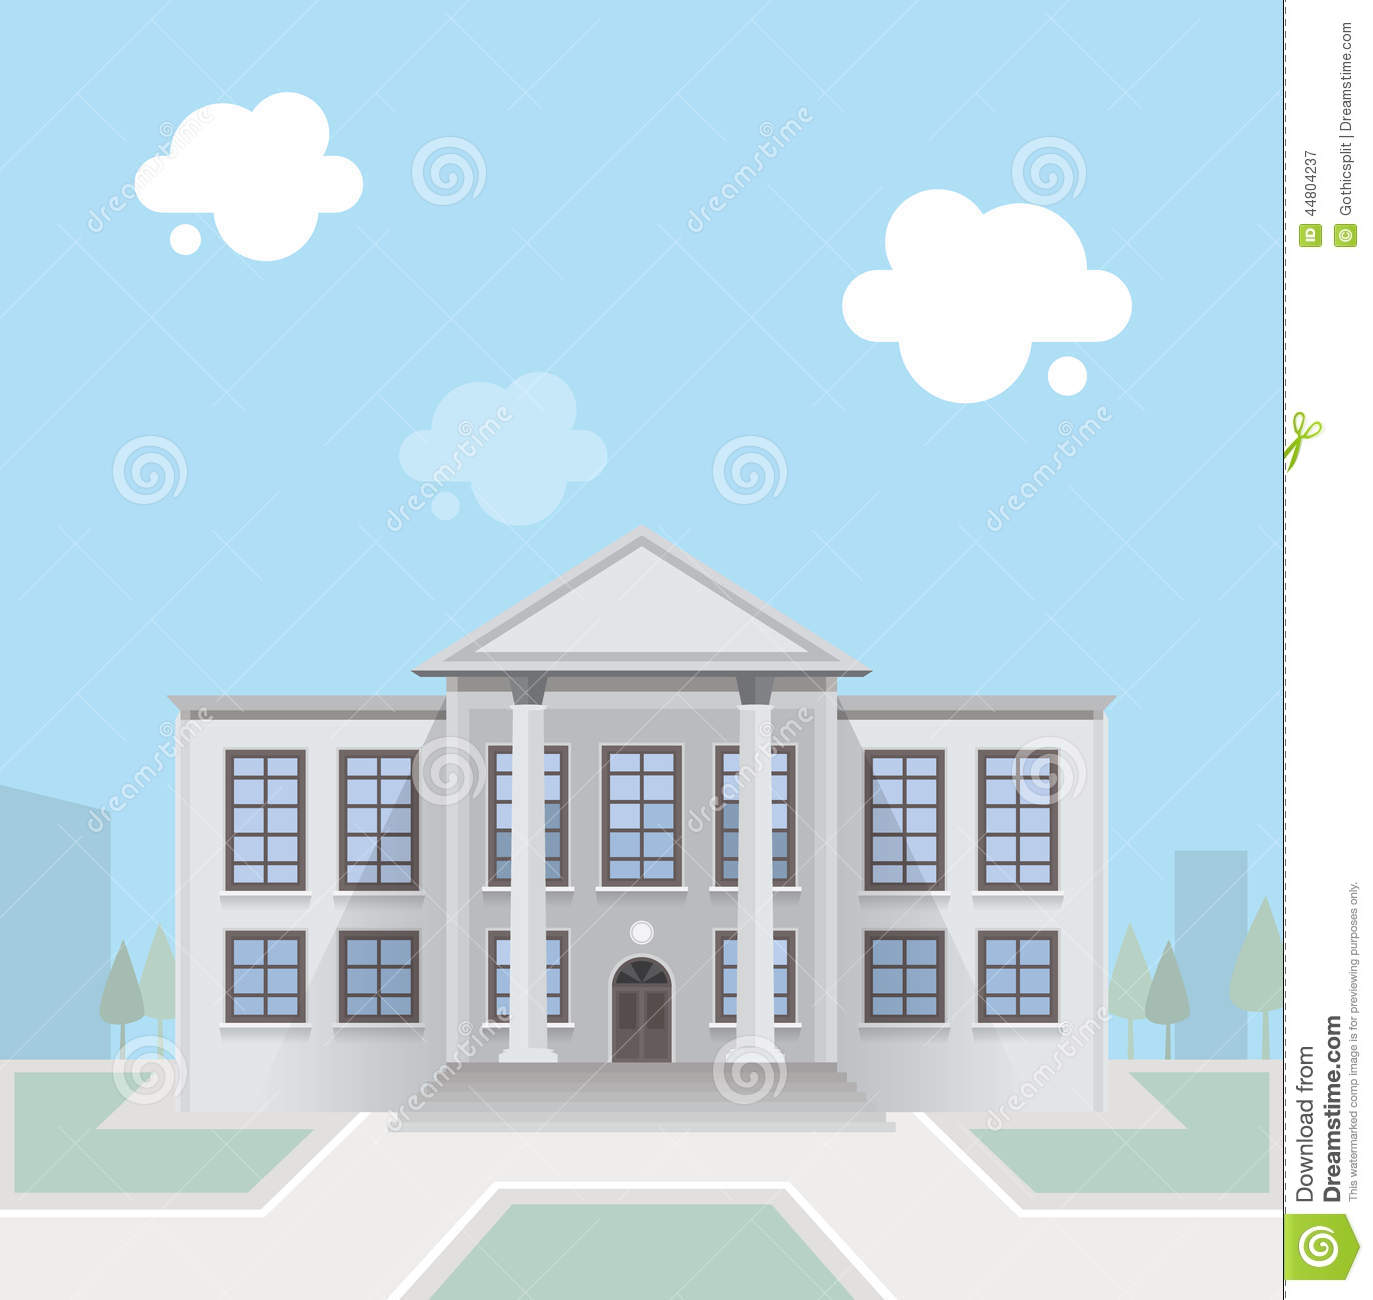 Flat Style Illustration Of City Hall  Vector Contains Transparent